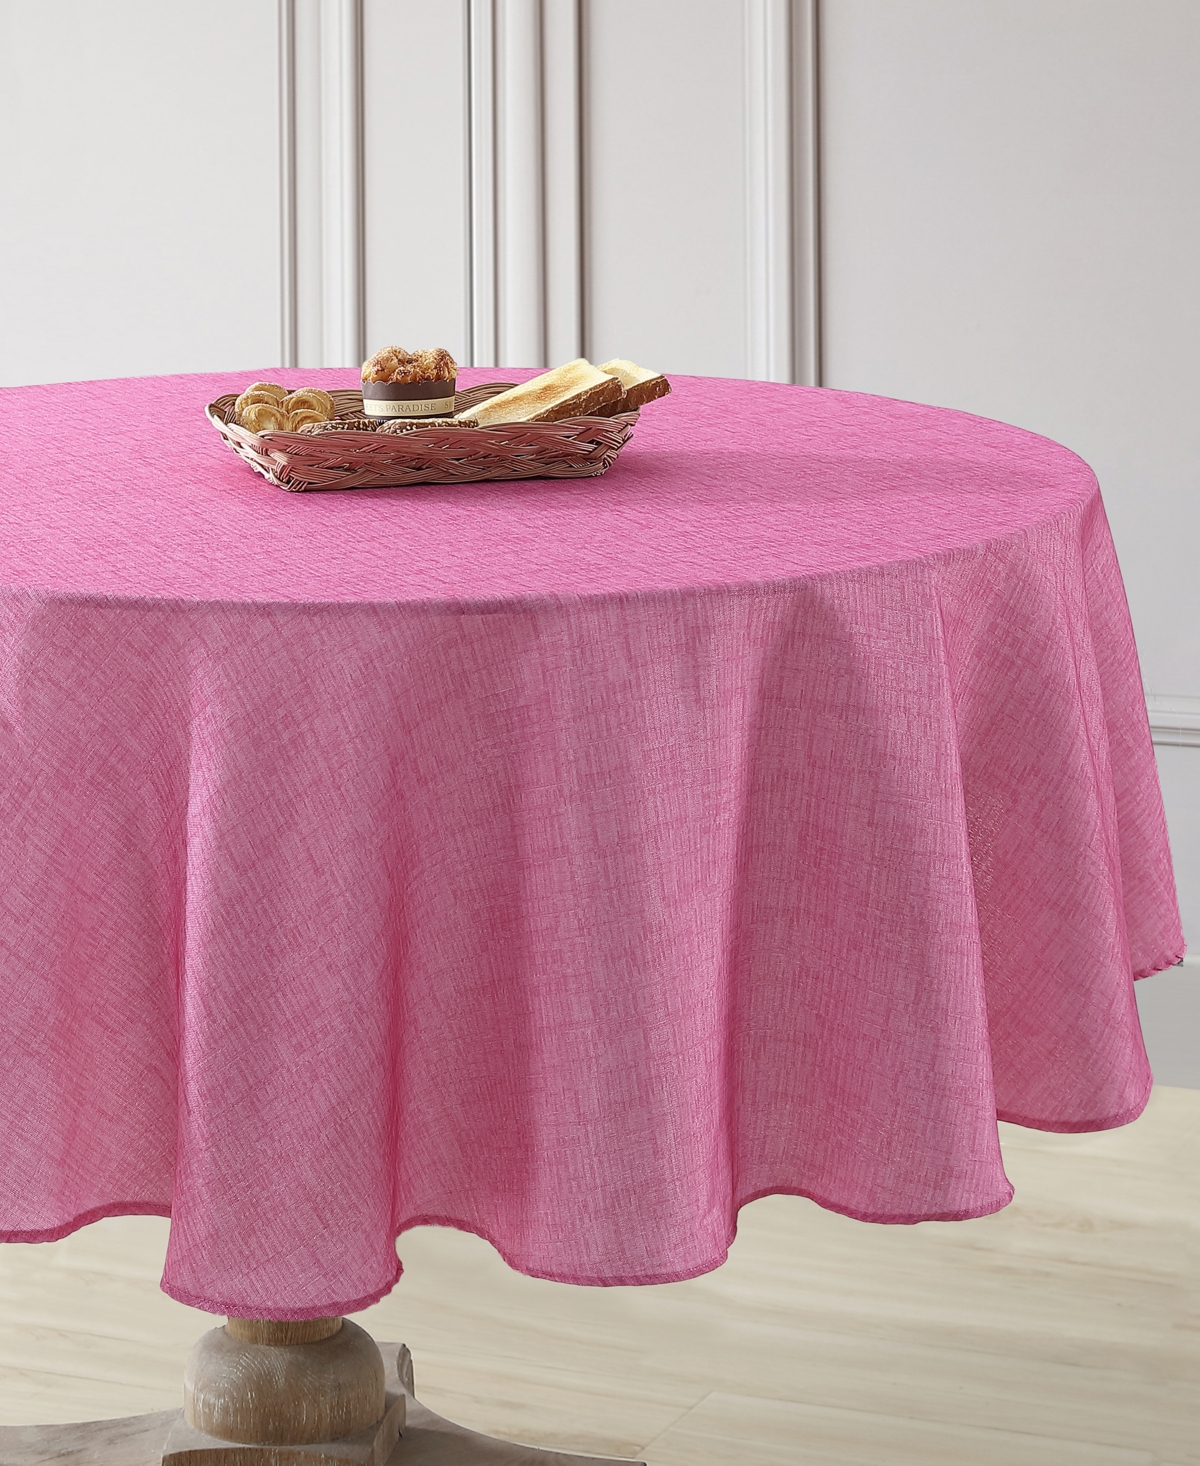 Laura Ashley Easy Care Tablecloth, 70" Round In Magenta